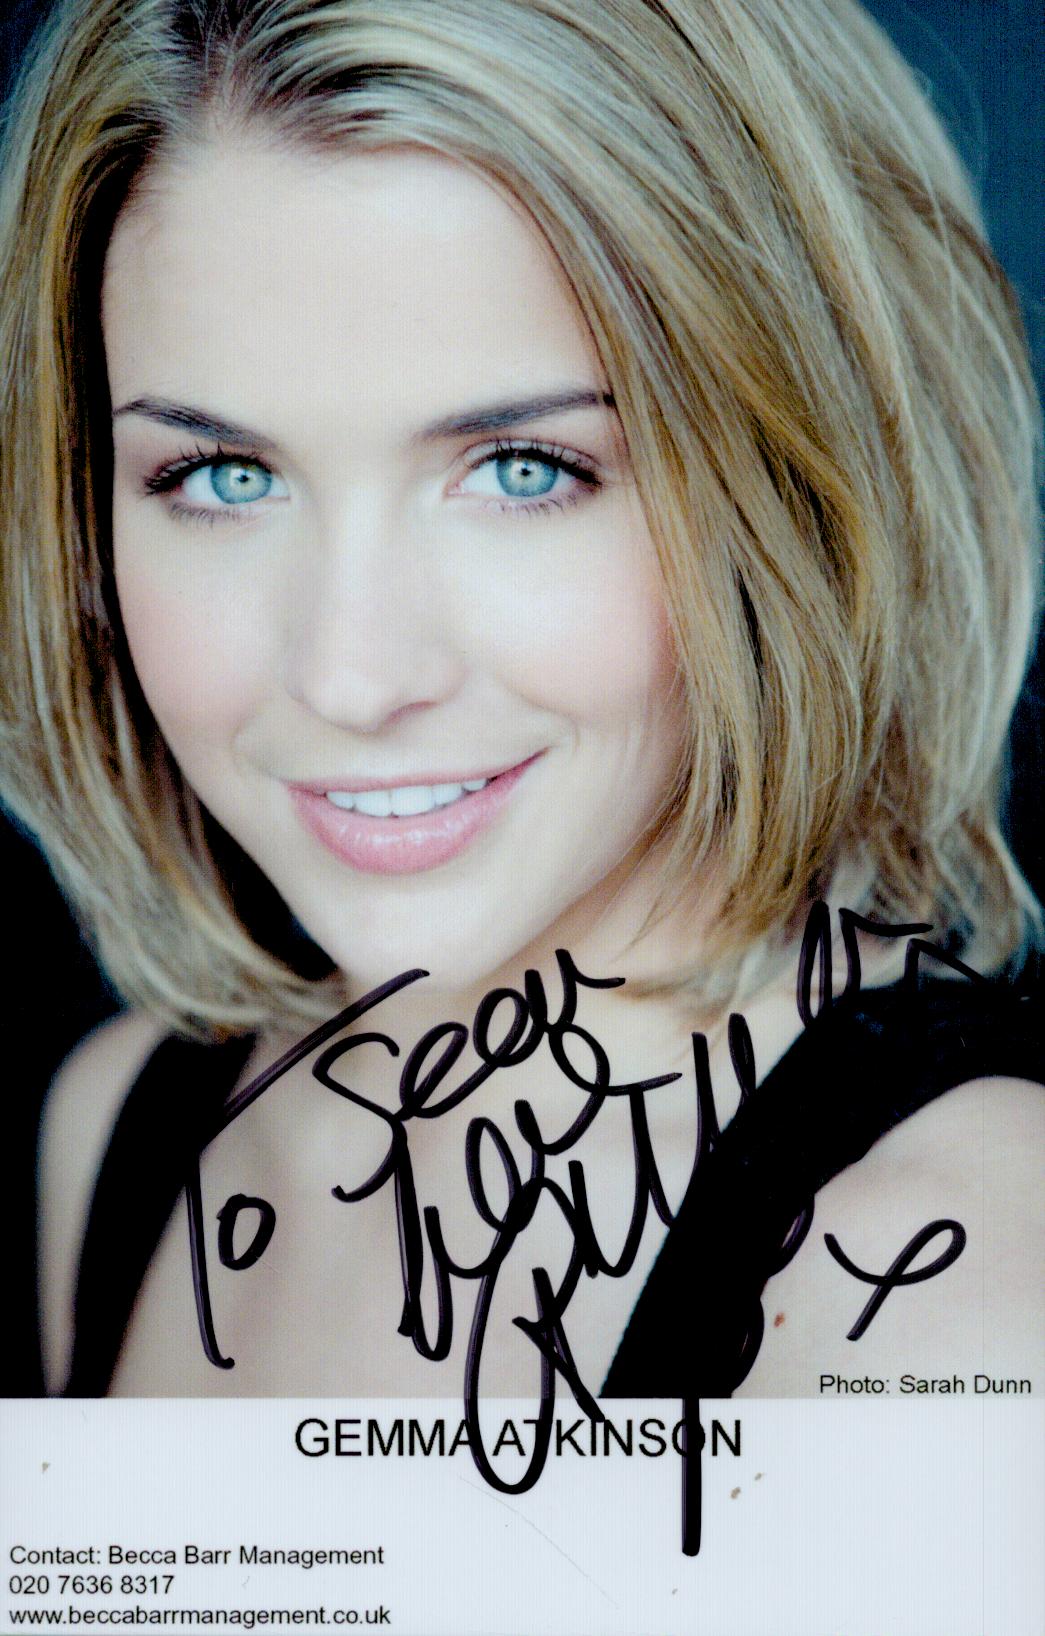 Gemma Atkinson signed colour photo 5.5x3.5 Inch. Dedicated. Is an English radio presenter and former